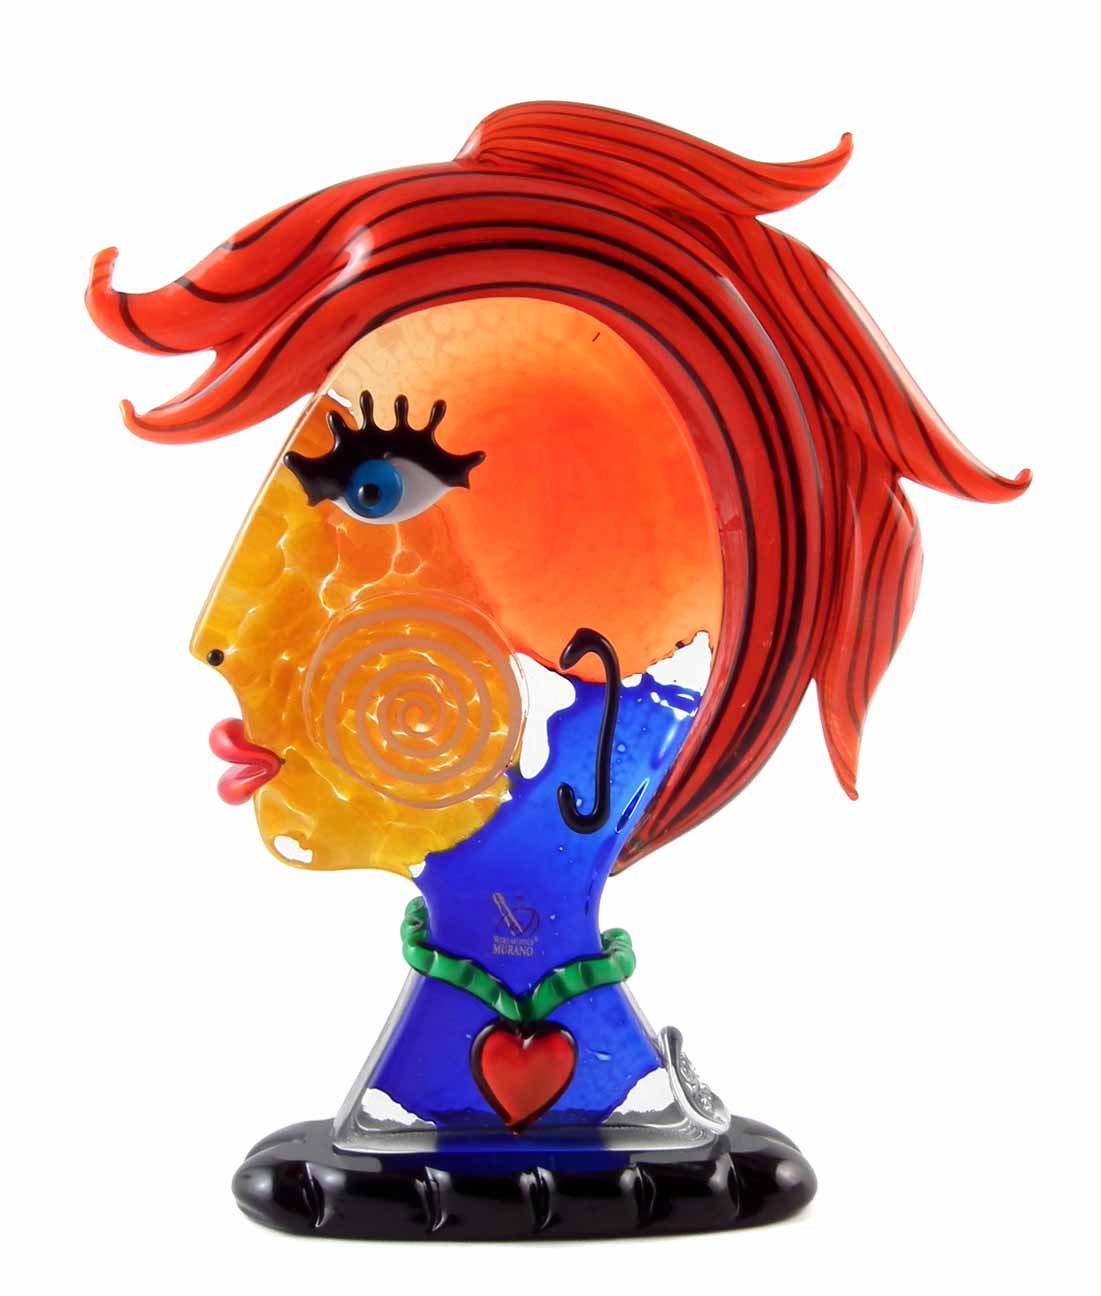 Murano Badioli Picasso inspired glass face sculpture, with impressed mark to side and etched